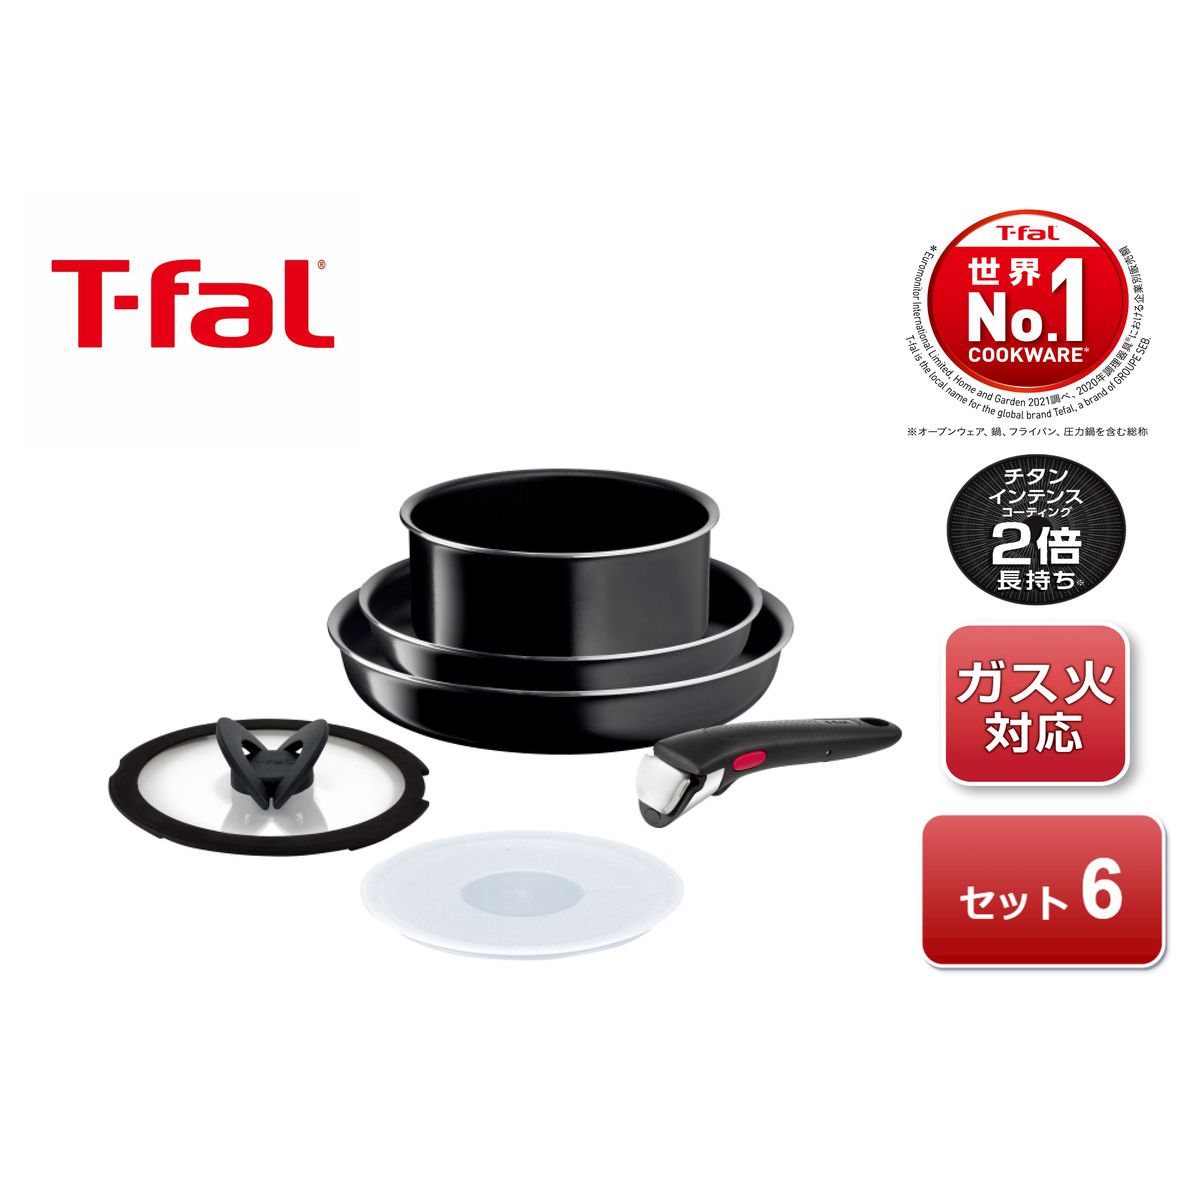 T-fal フライパン 6点セット | www.innoveering.net